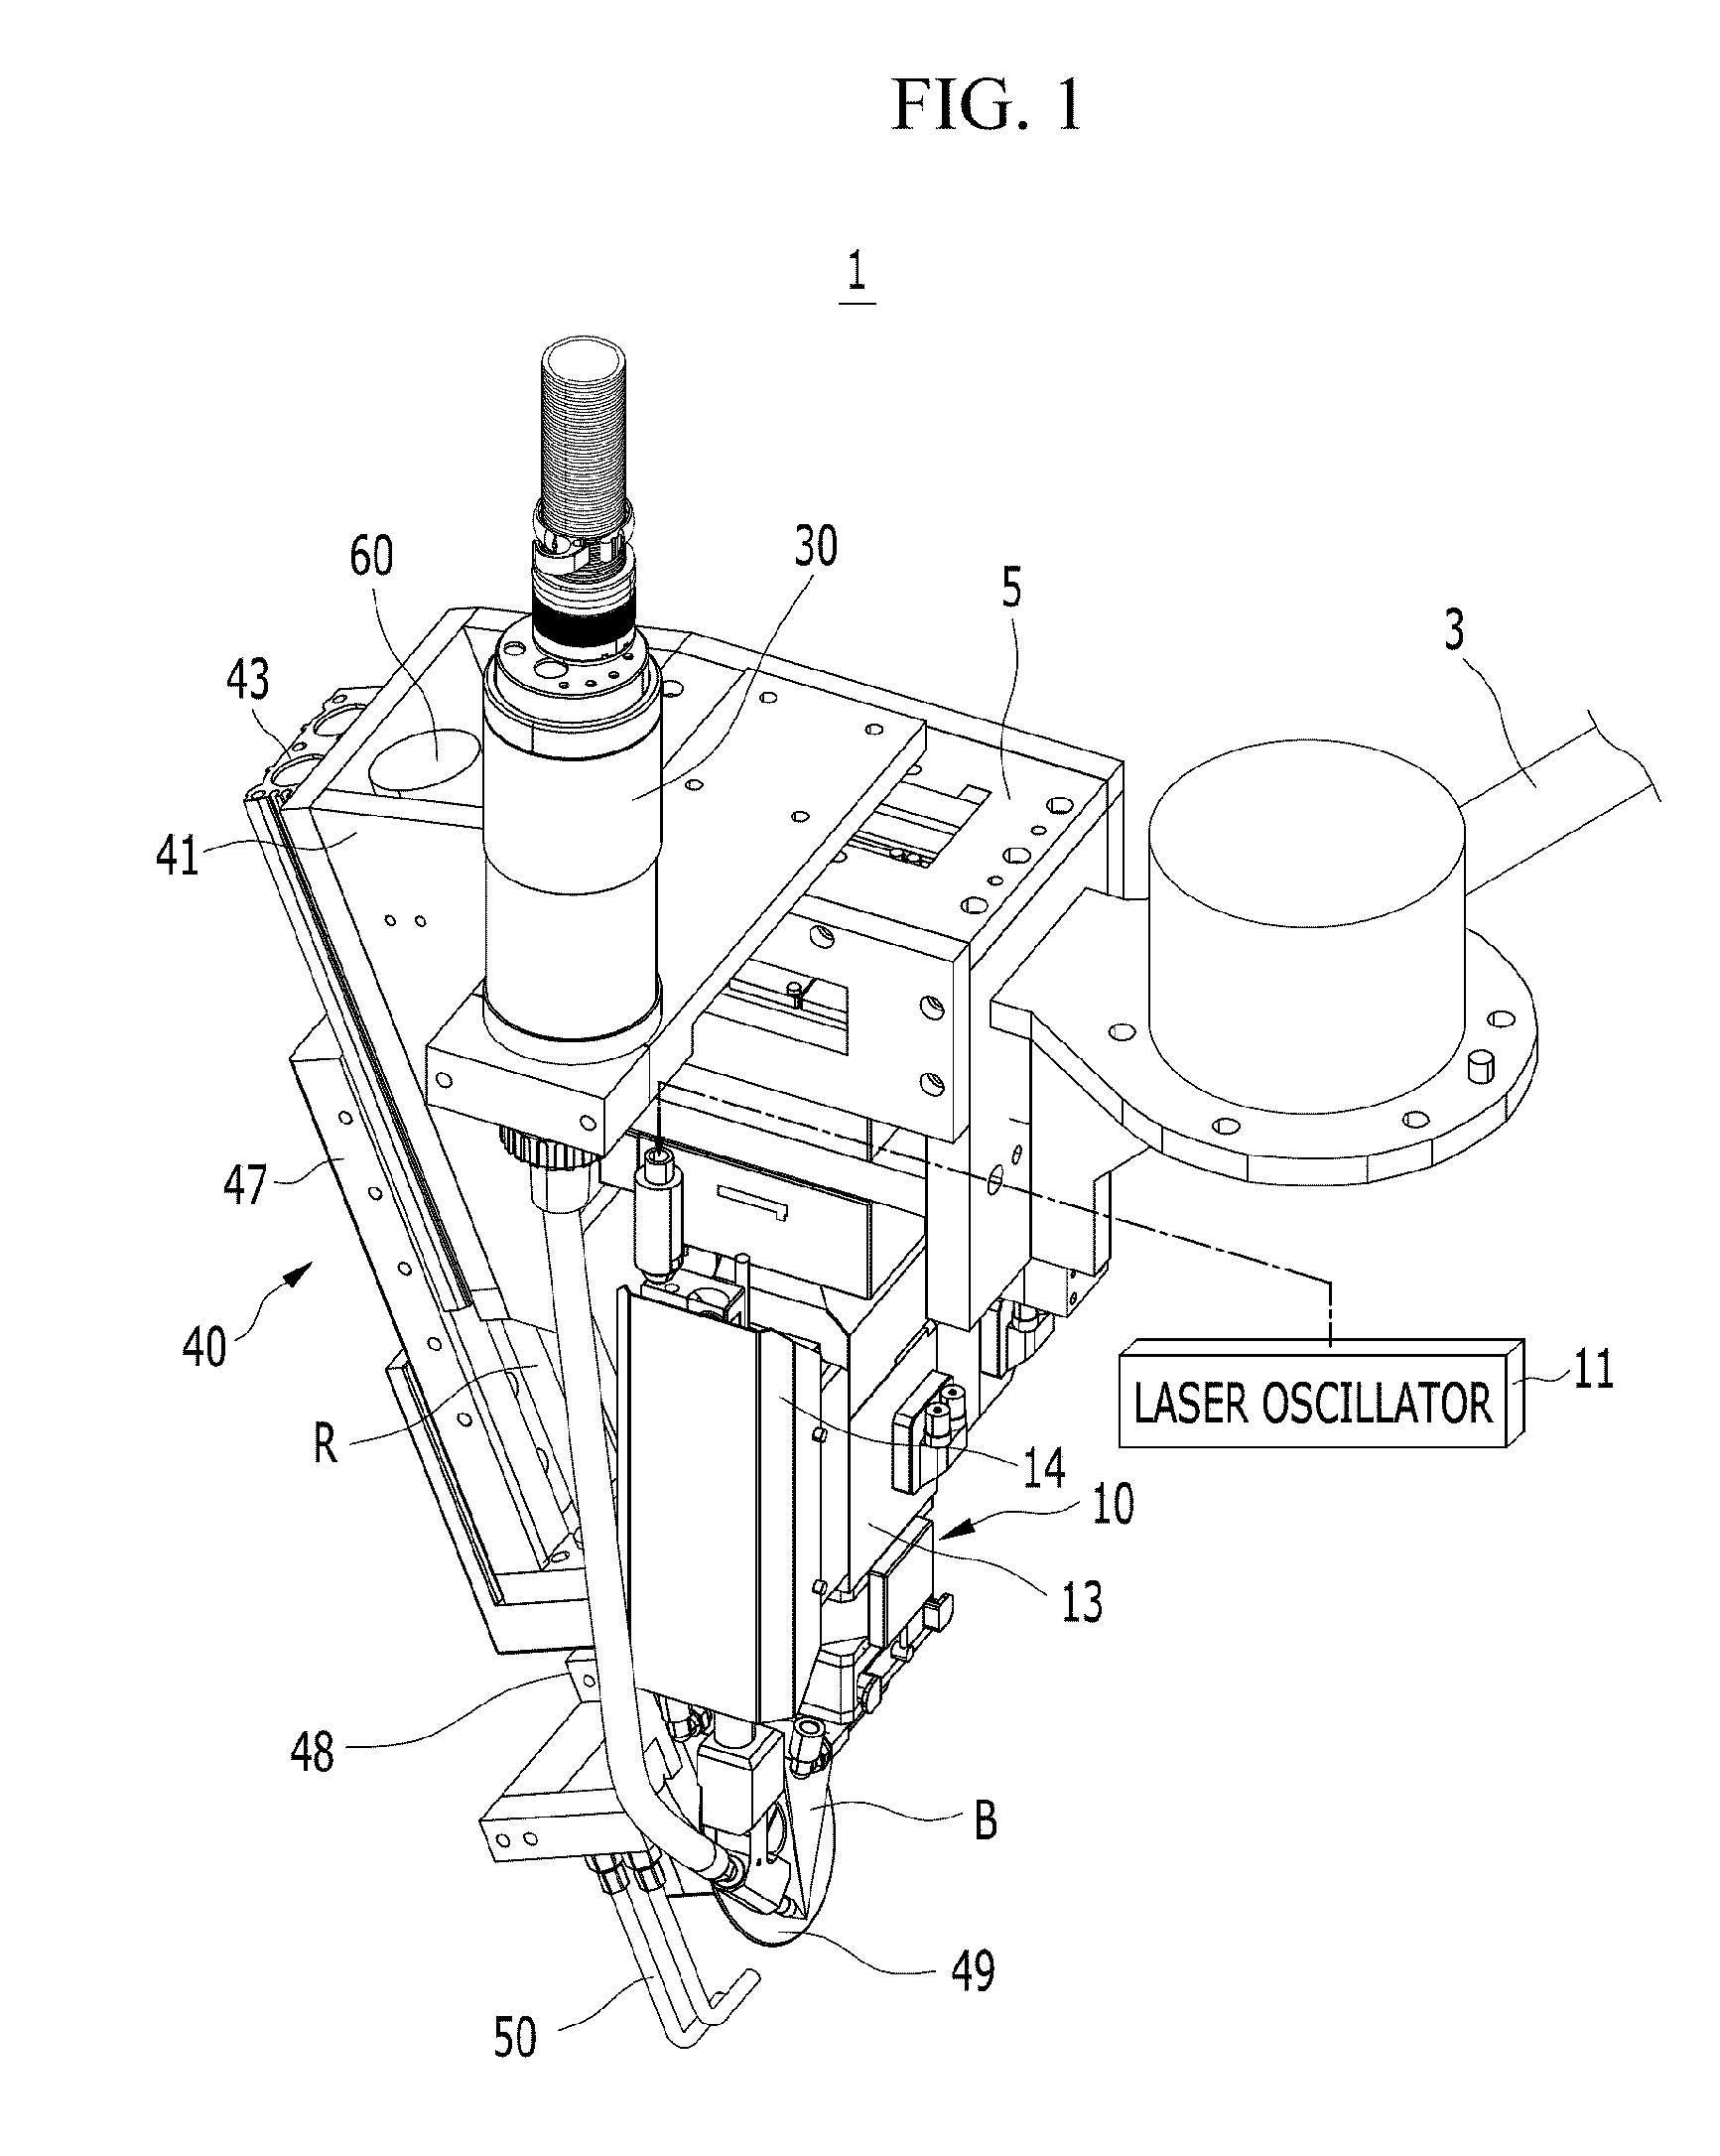 Laser apparatus for welding